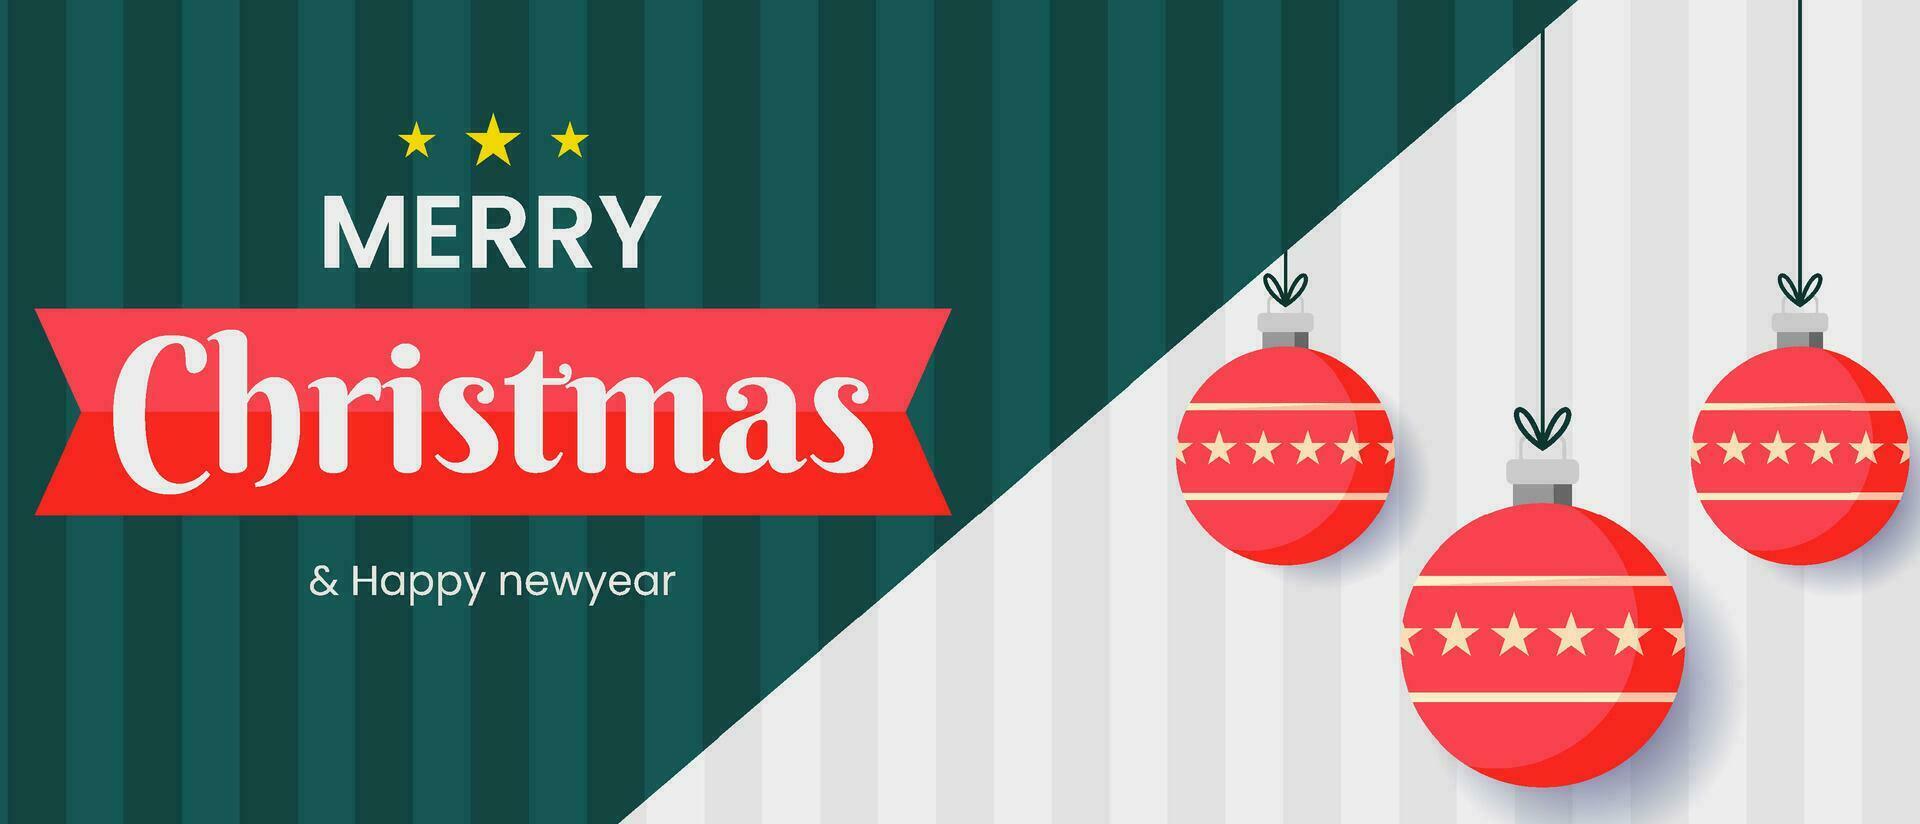 Christmas greeting banner background with vector illustration of red Christmas lights to celebrate the Christmas holiday